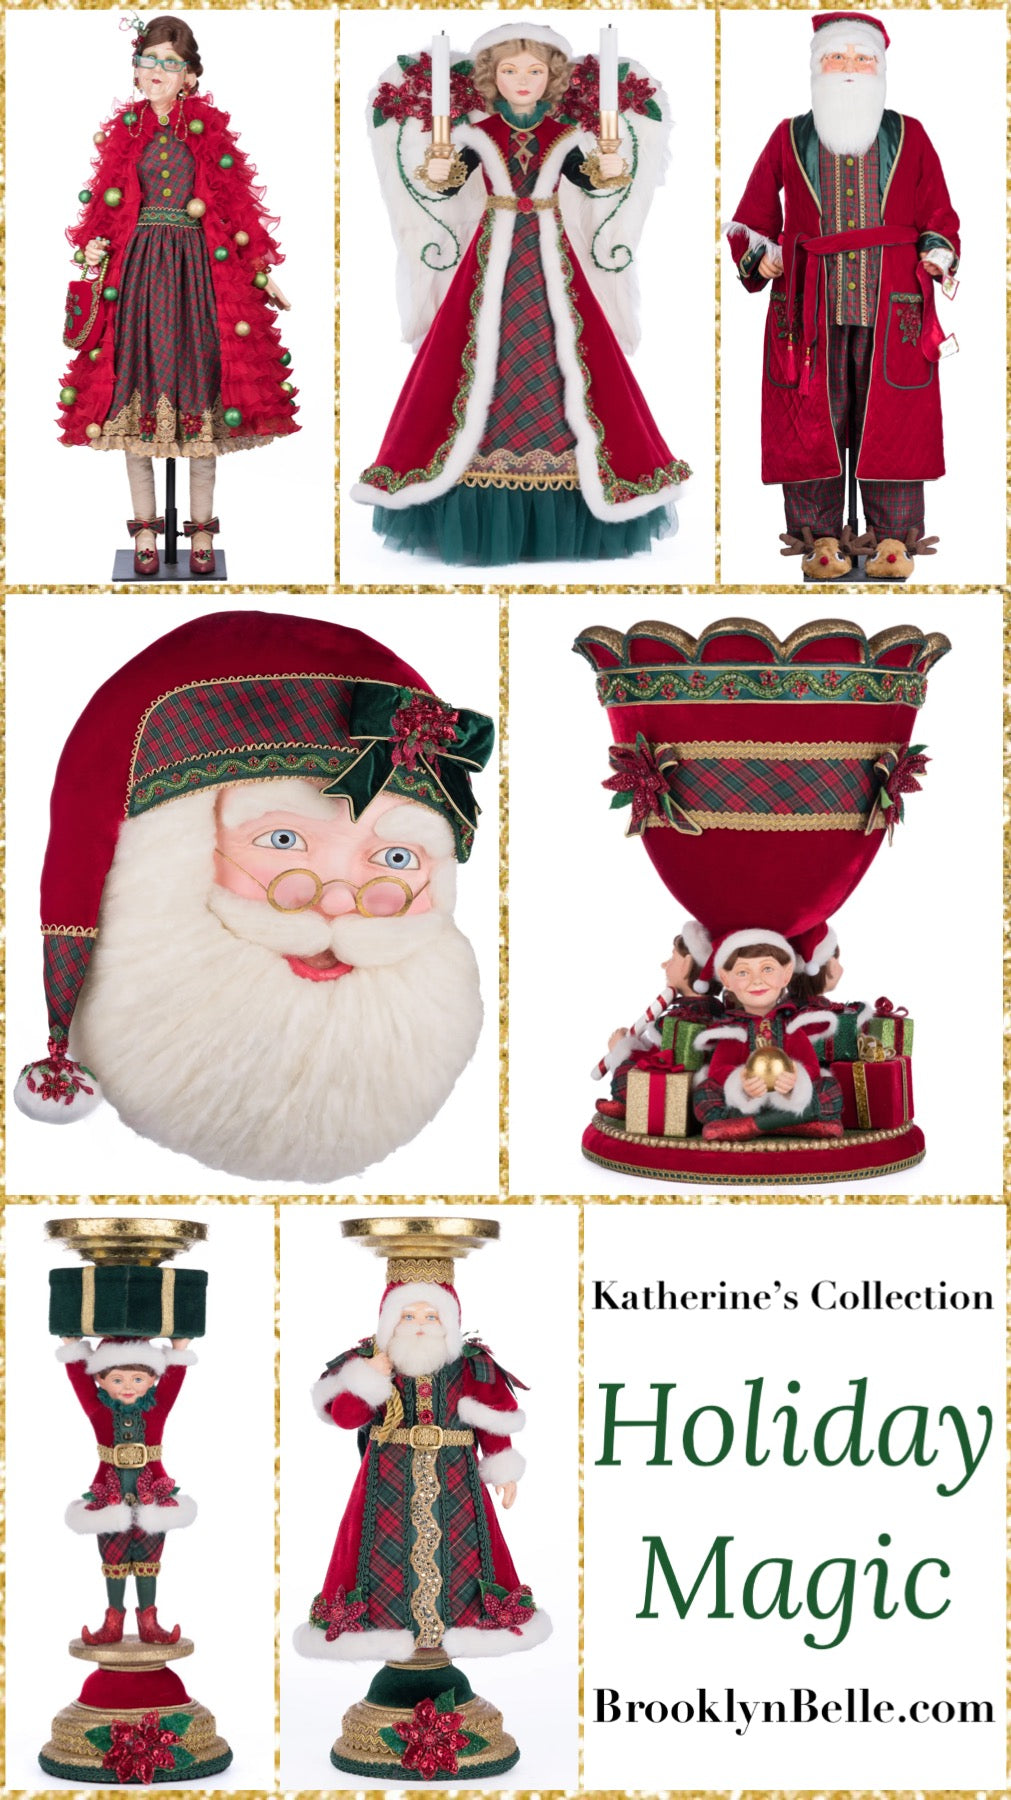 Katherine's Collection Holiday Magic Elf Holding Gift Candy Bowl   Katherine's Collection Christmas Elf Candy Christmas Bowl